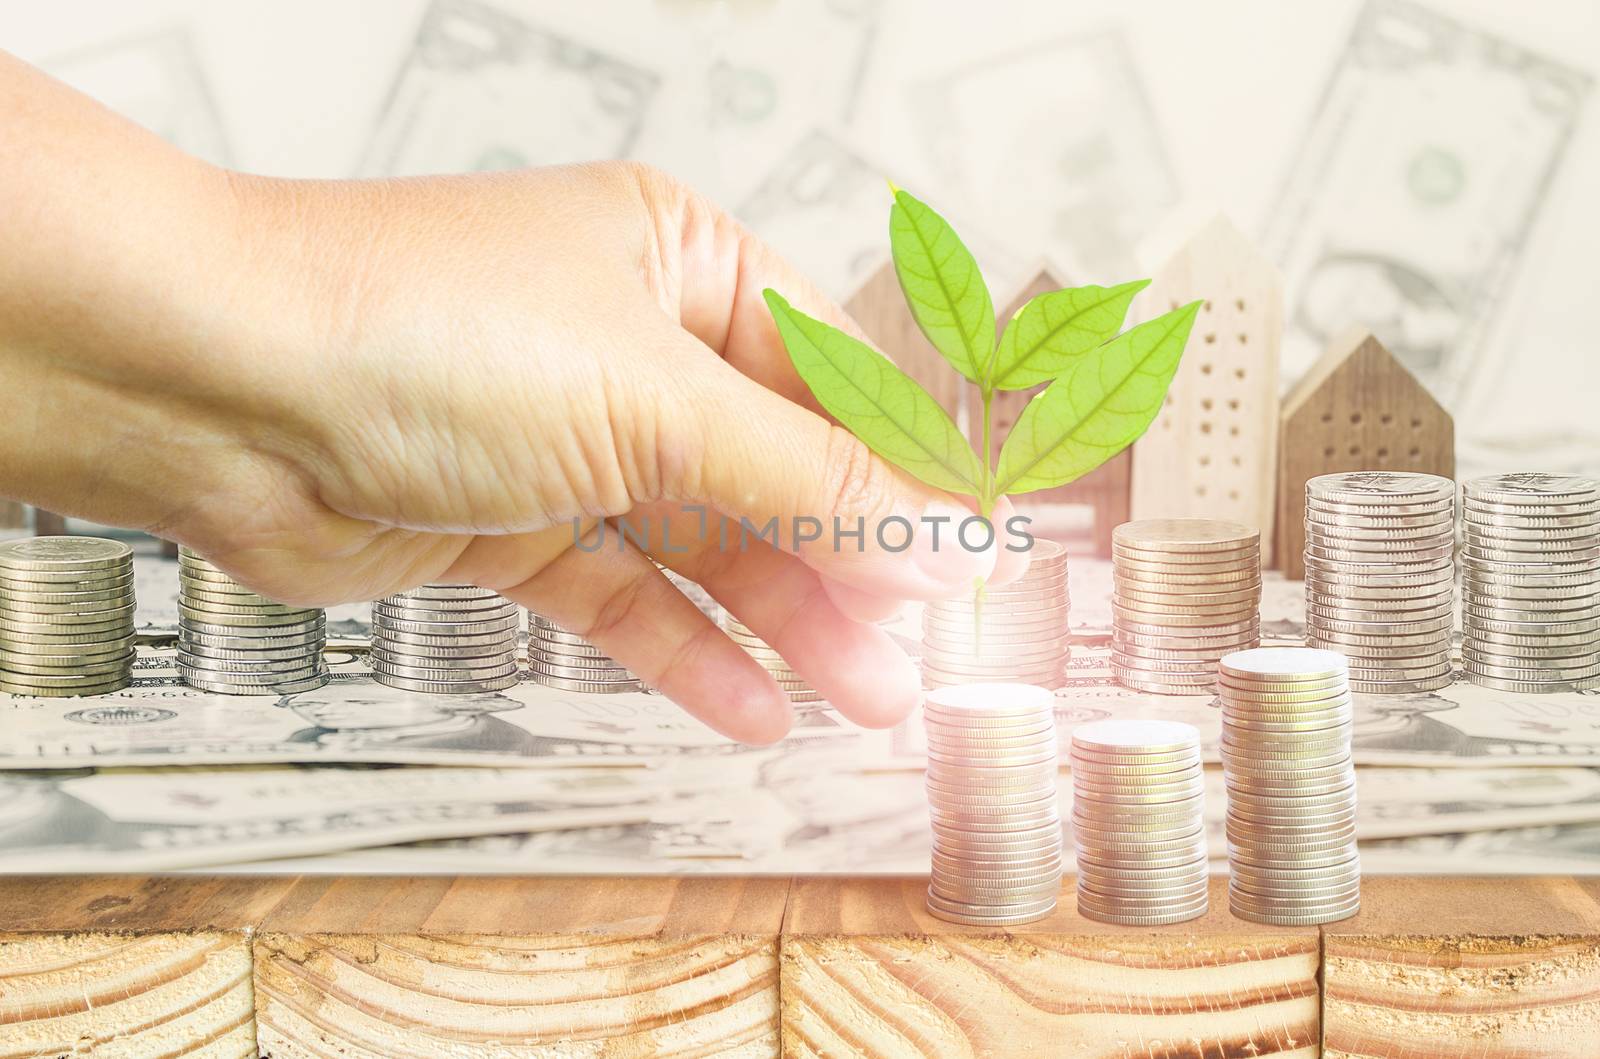 Close-Up Of Female Hand Pick Up The Leaf On The Coin With Dollar Banknote Blur Background ,Business Finance And Money Concept, Business Investment Growth Concept by rakoptonLPN